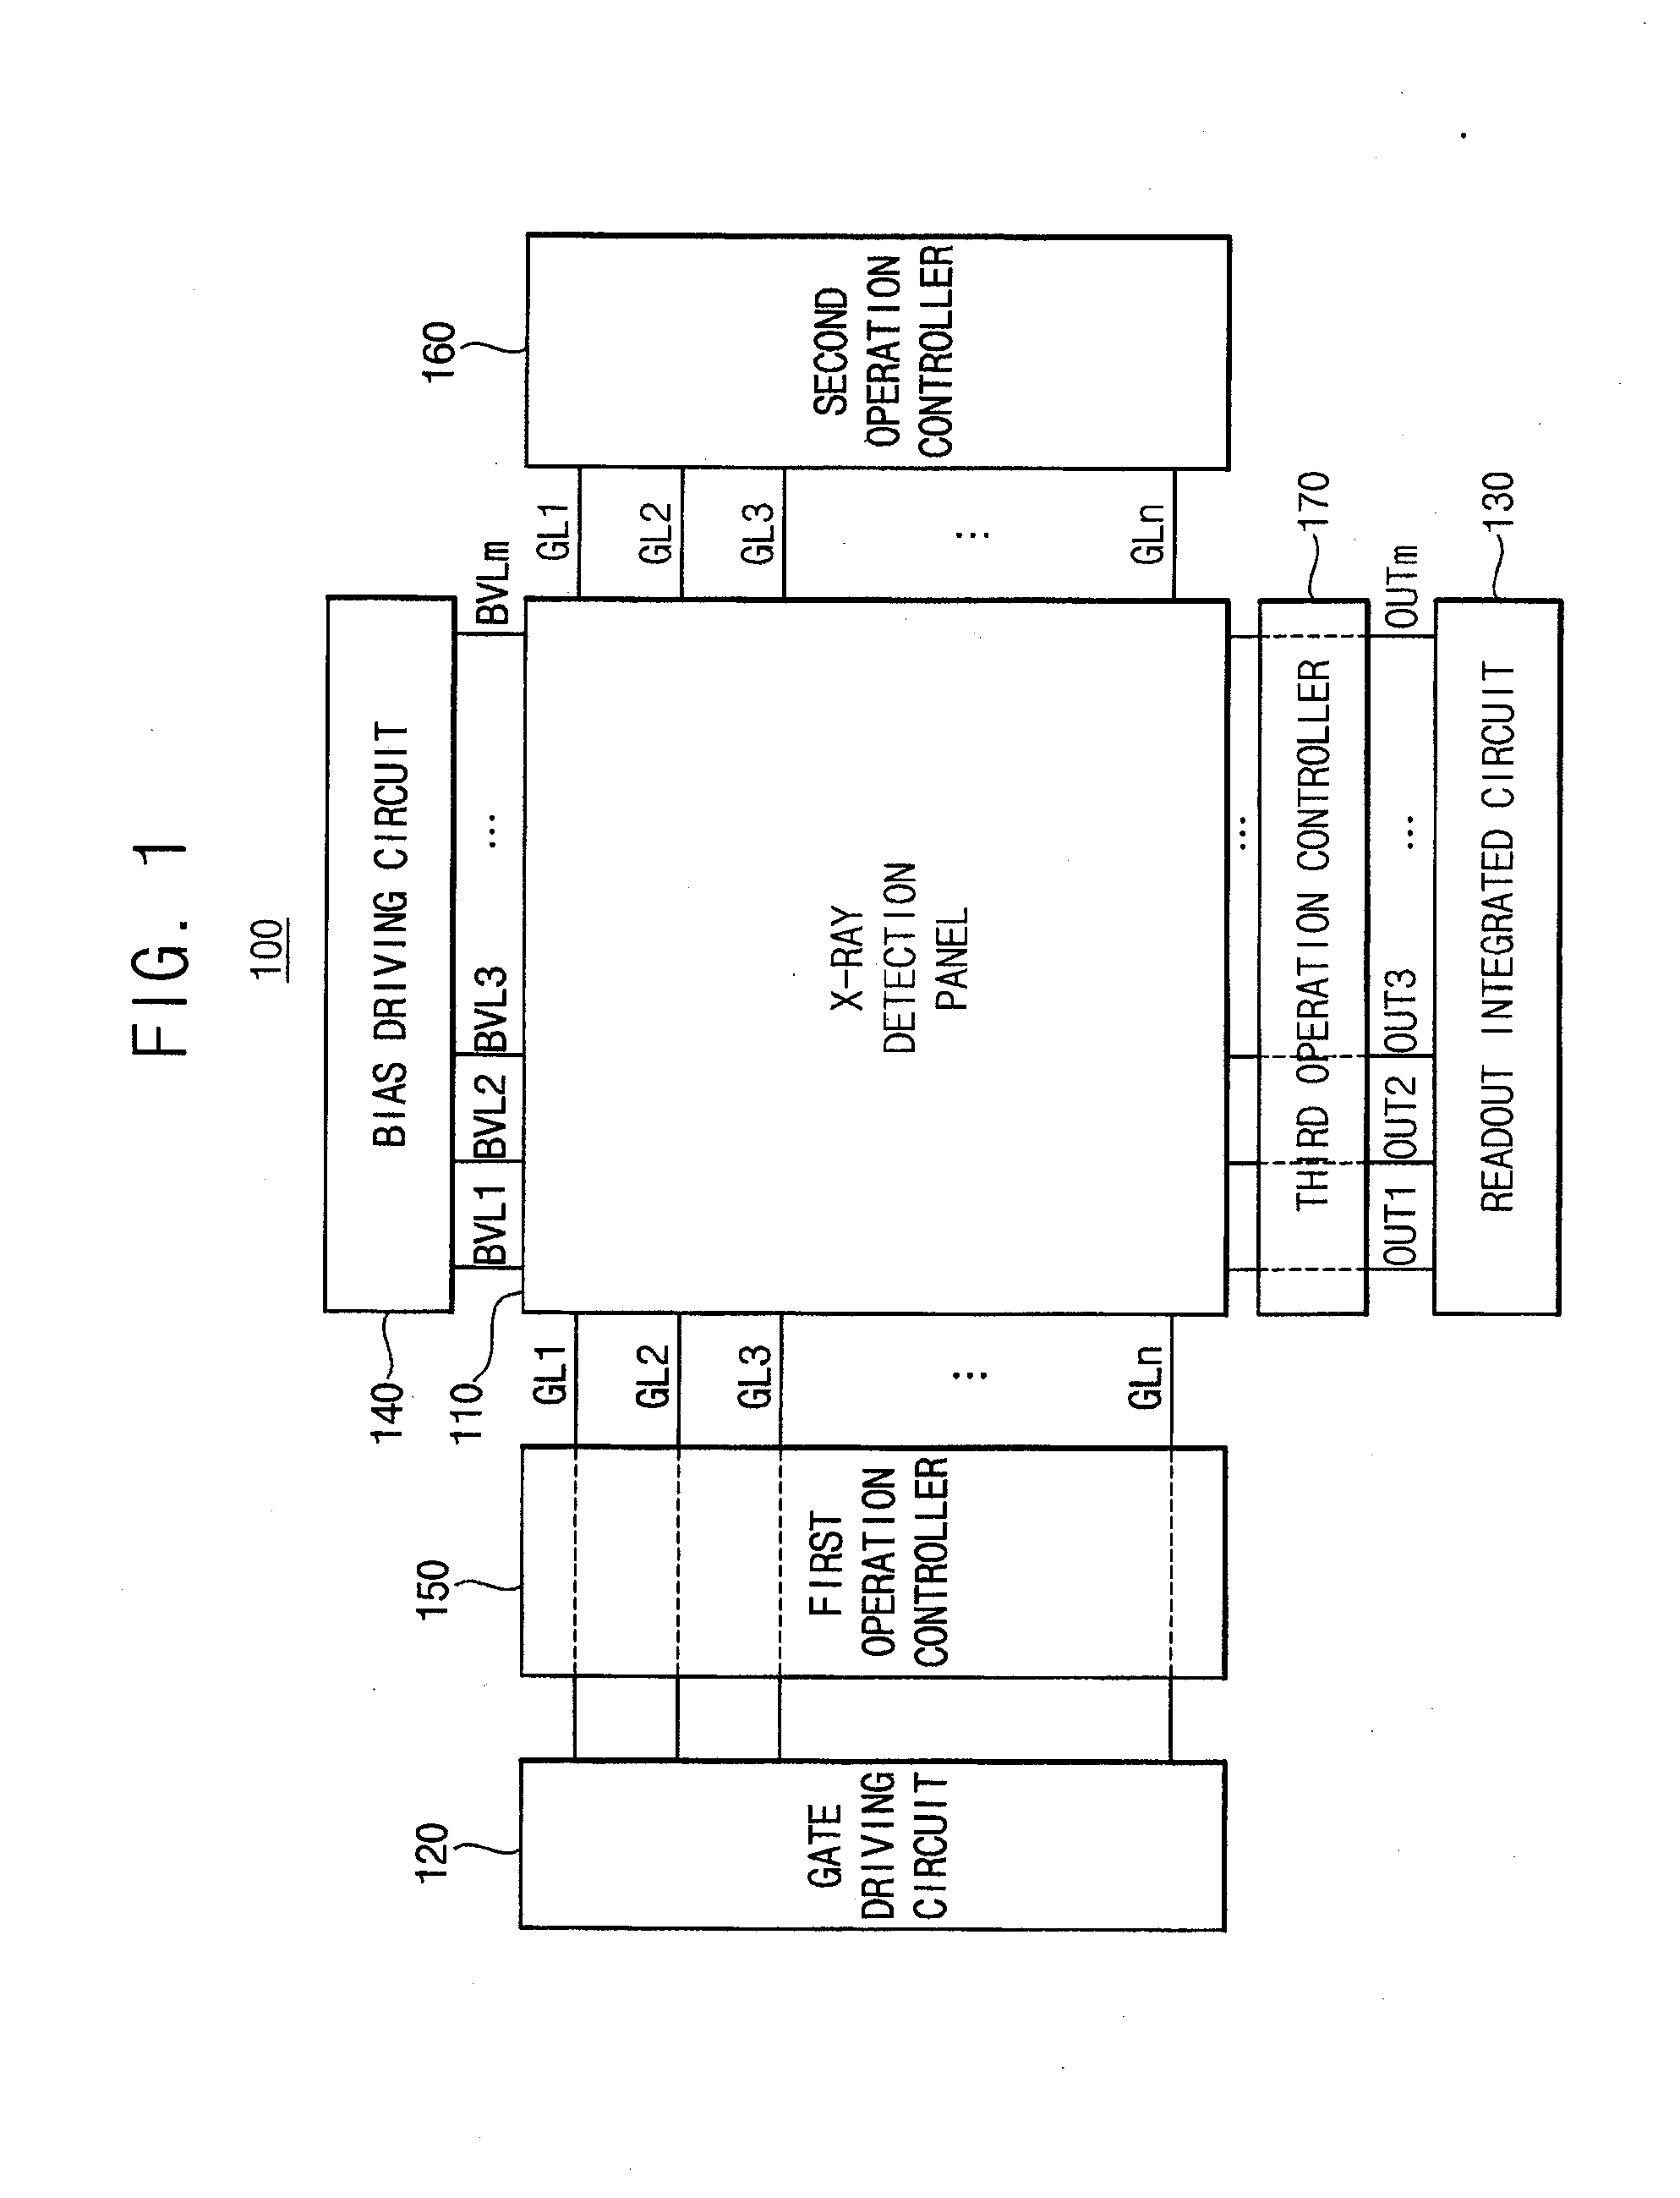 X-ray detection device and method of driving an x-ray detection panel